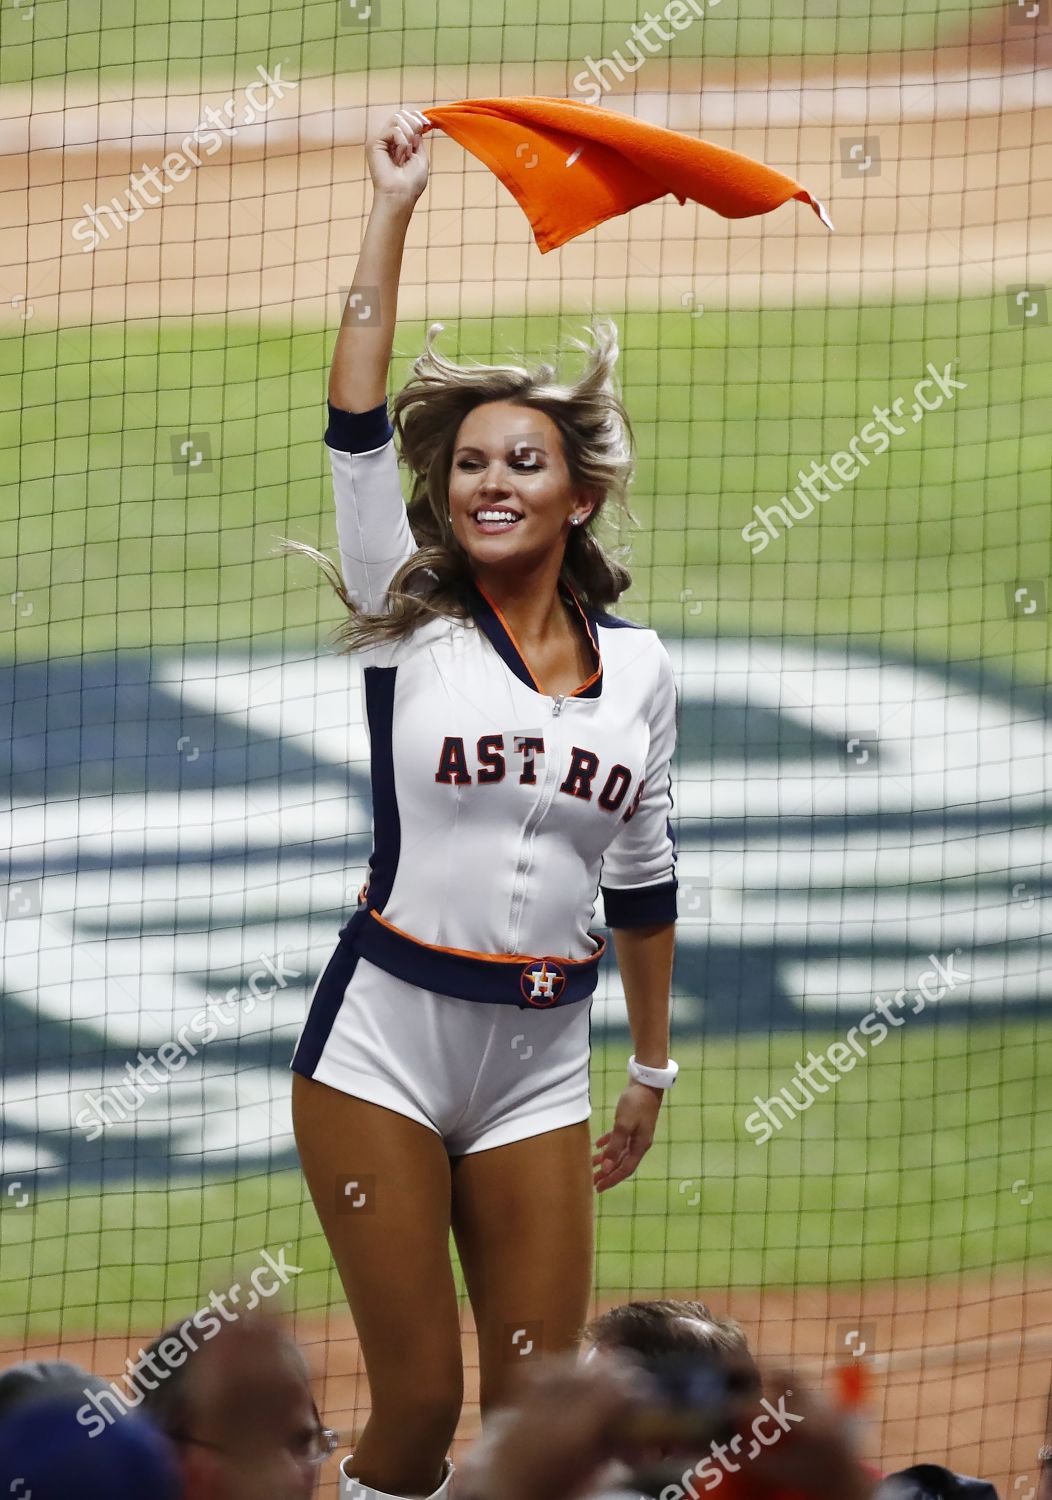 Astros Shooting Star Stands During Introductions Editorial Stock Photo -  Stock Image